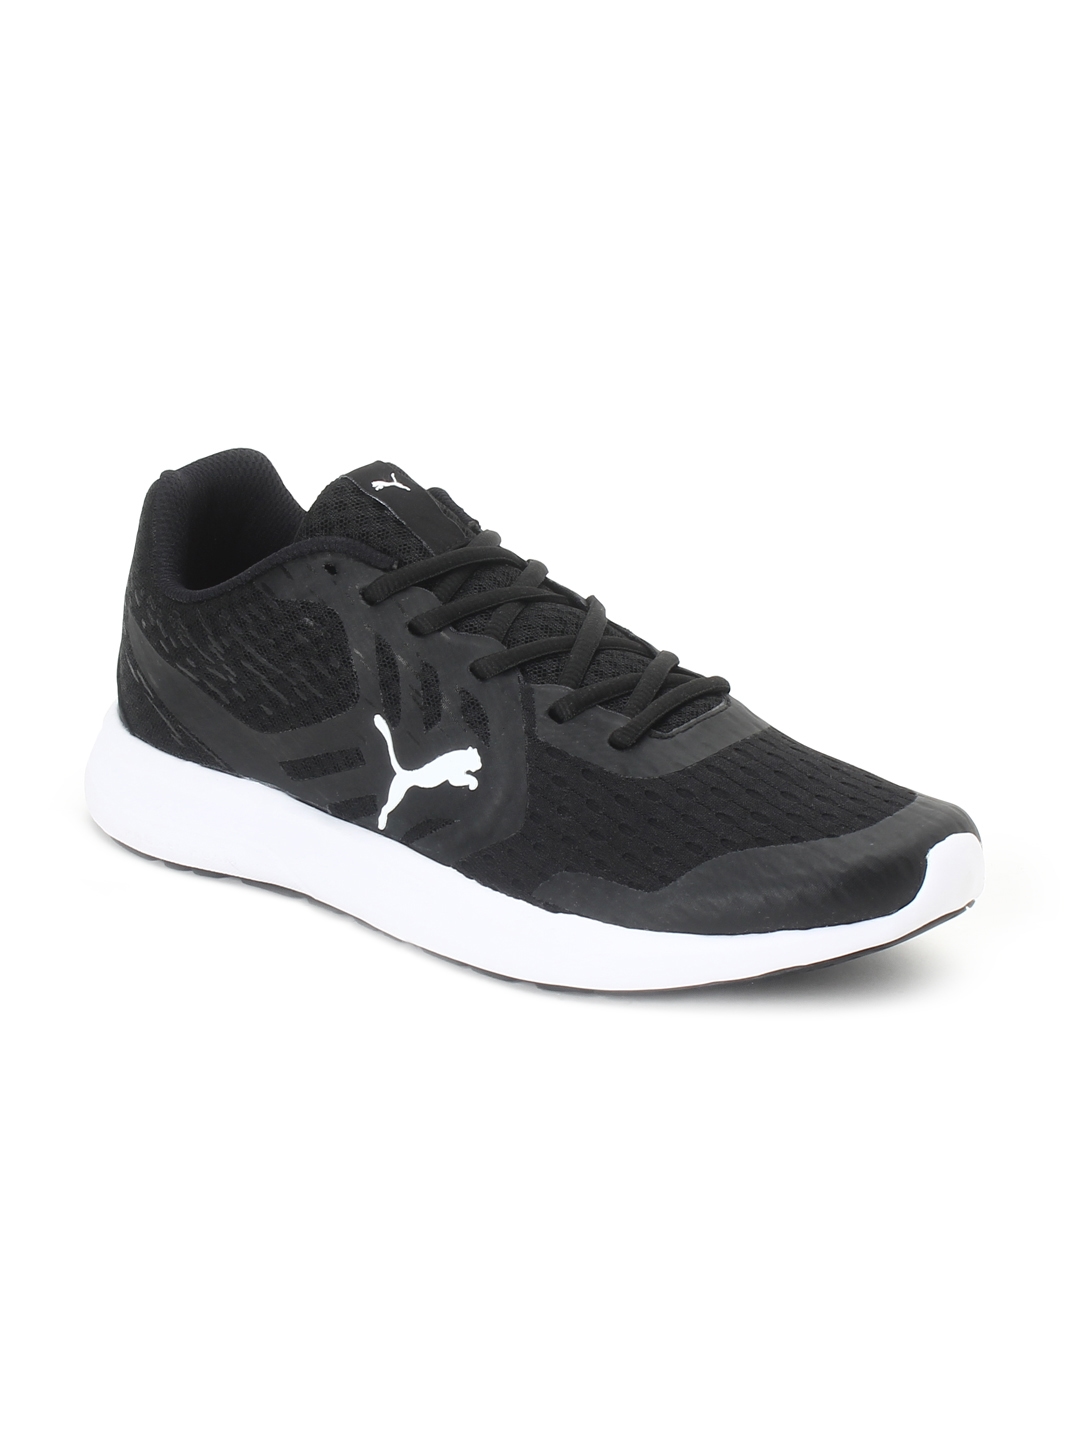 black and grey puma sneakers